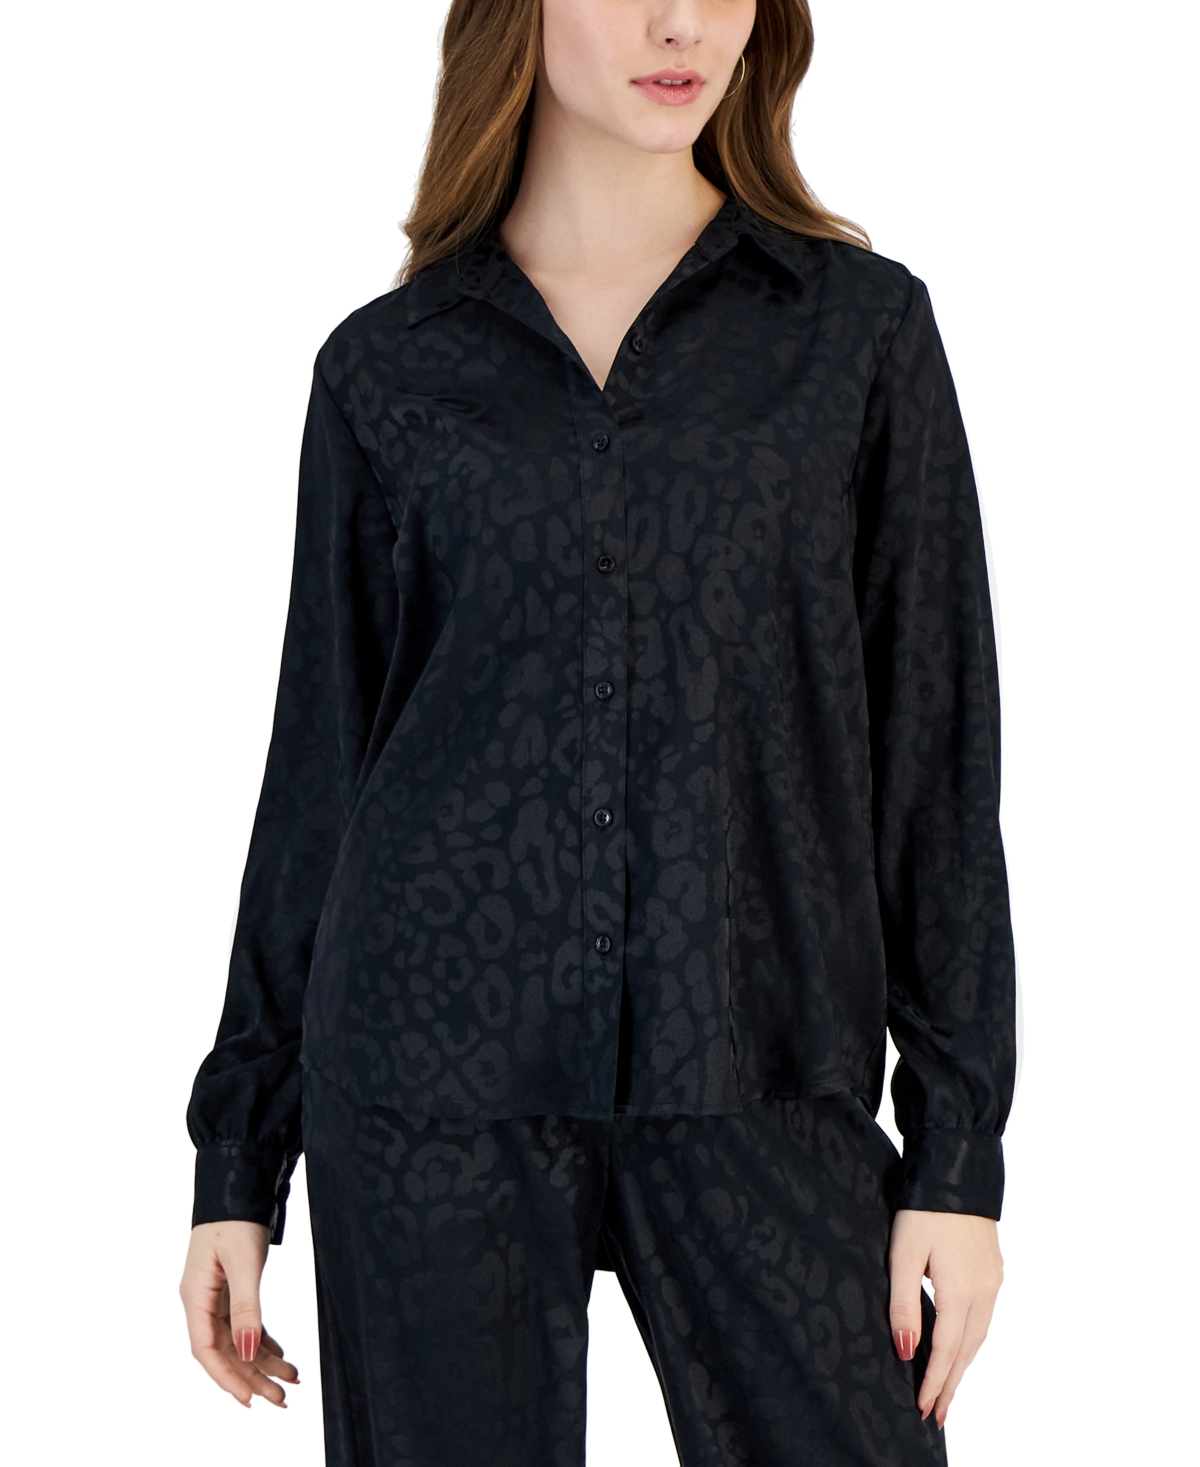 Jm Collection Plus Printed Medallion 3/4-Sleeve Top, Created for Macy's